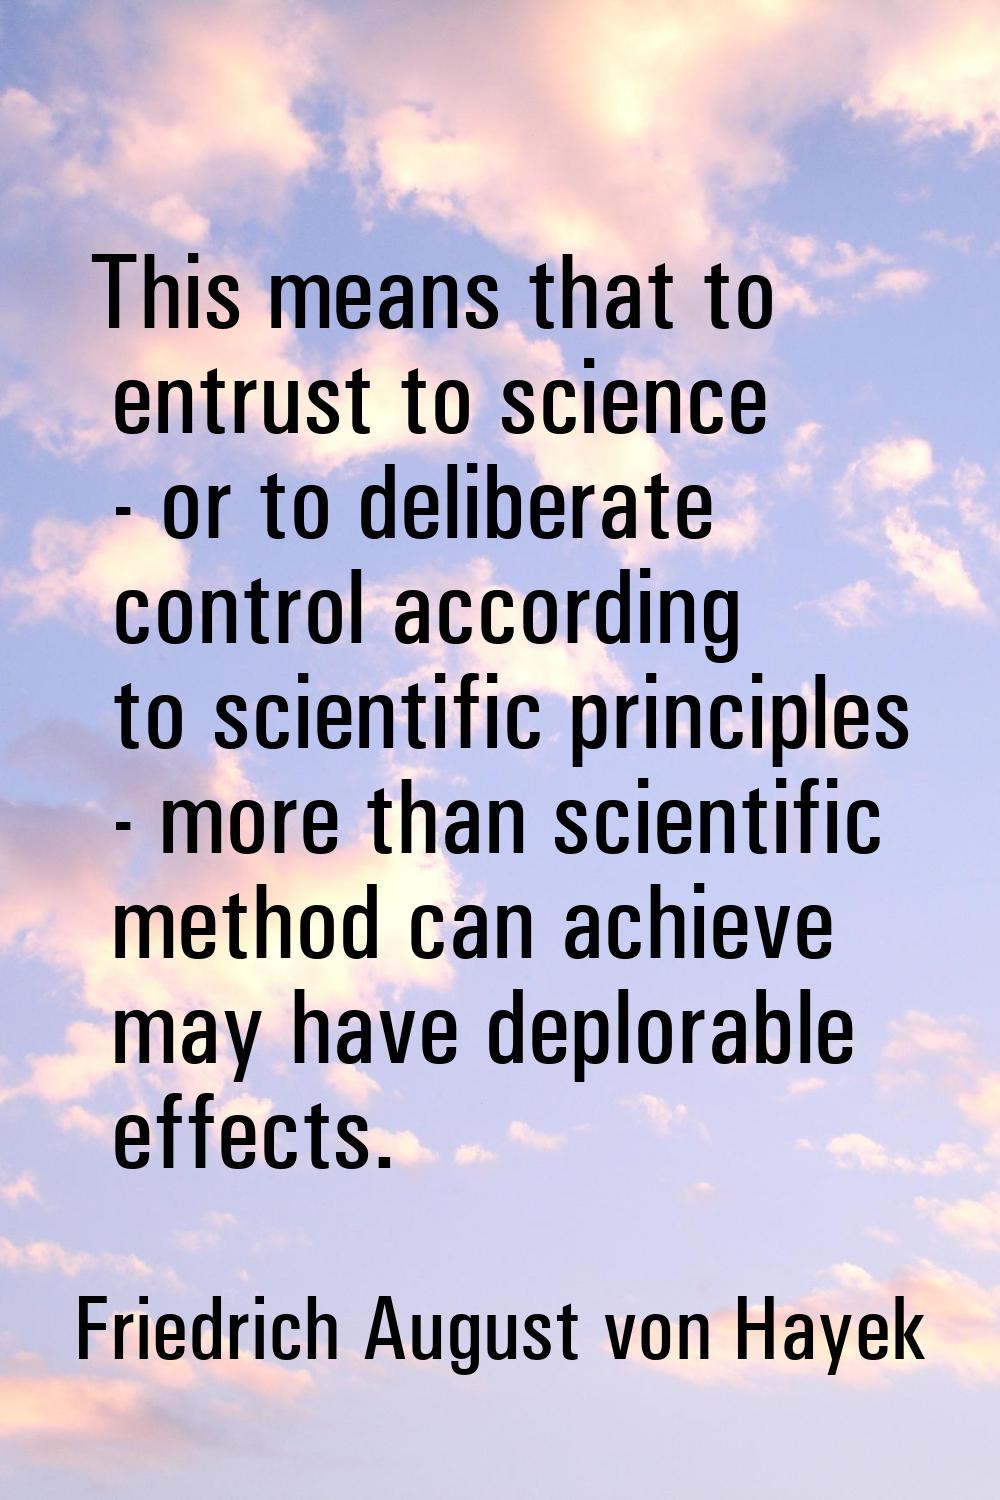 This means that to entrust to science - or to deliberate control according to scientific principles